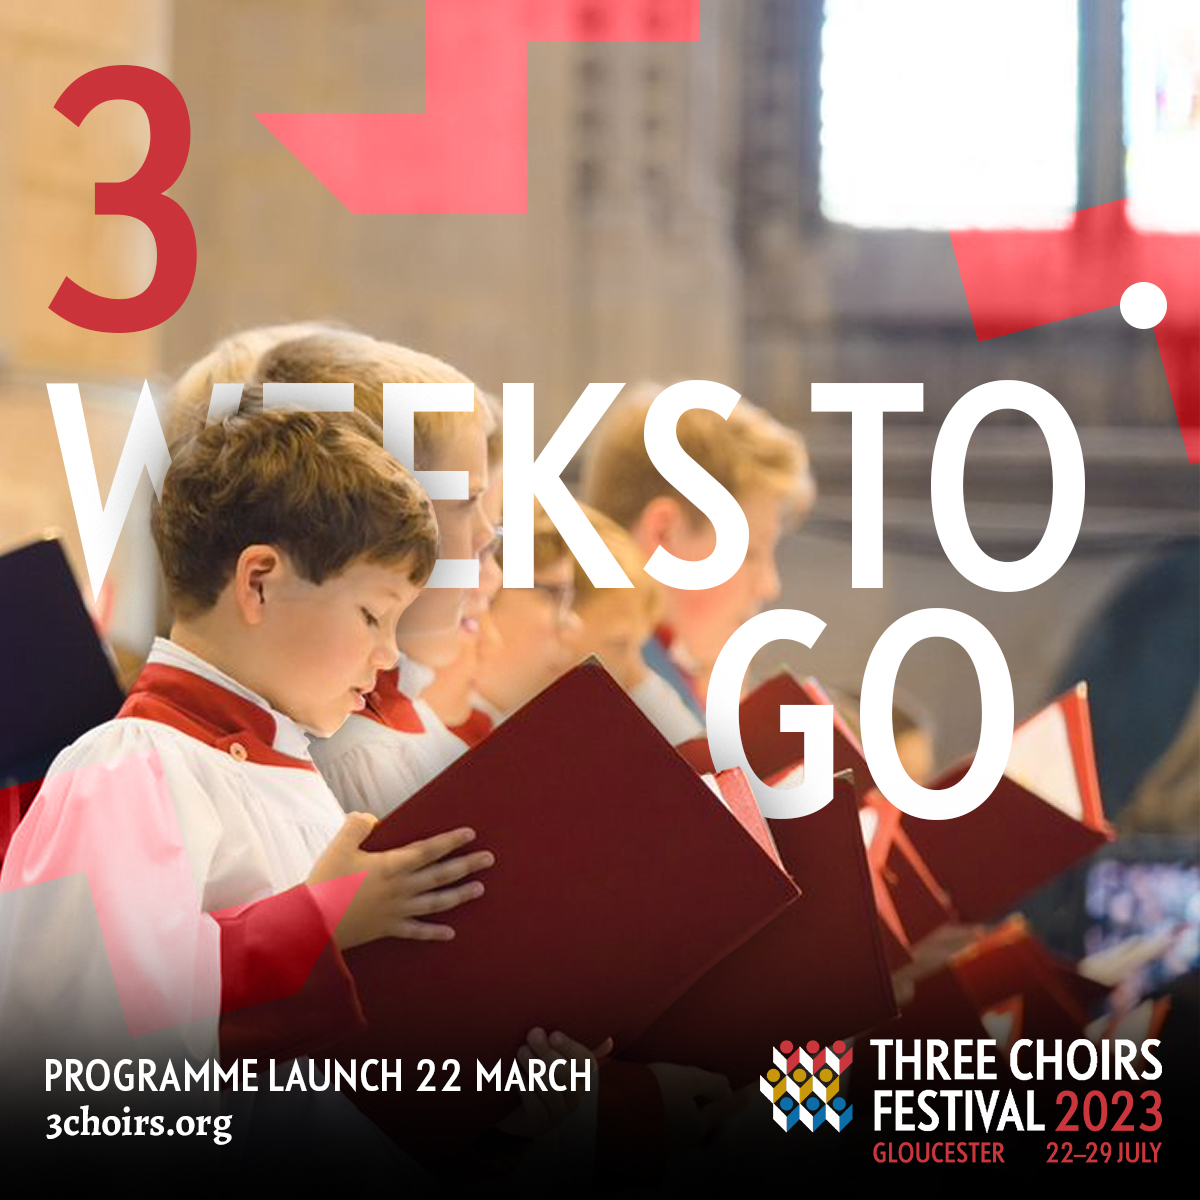 Just 3 weeks until our programme launch! It's getting closer! Make a note in those diaries for the 22nd March! 🎶
#3choirsfestival #3Choirs #gloucester2023
#gloucester #gloucestershire #visitgloucester